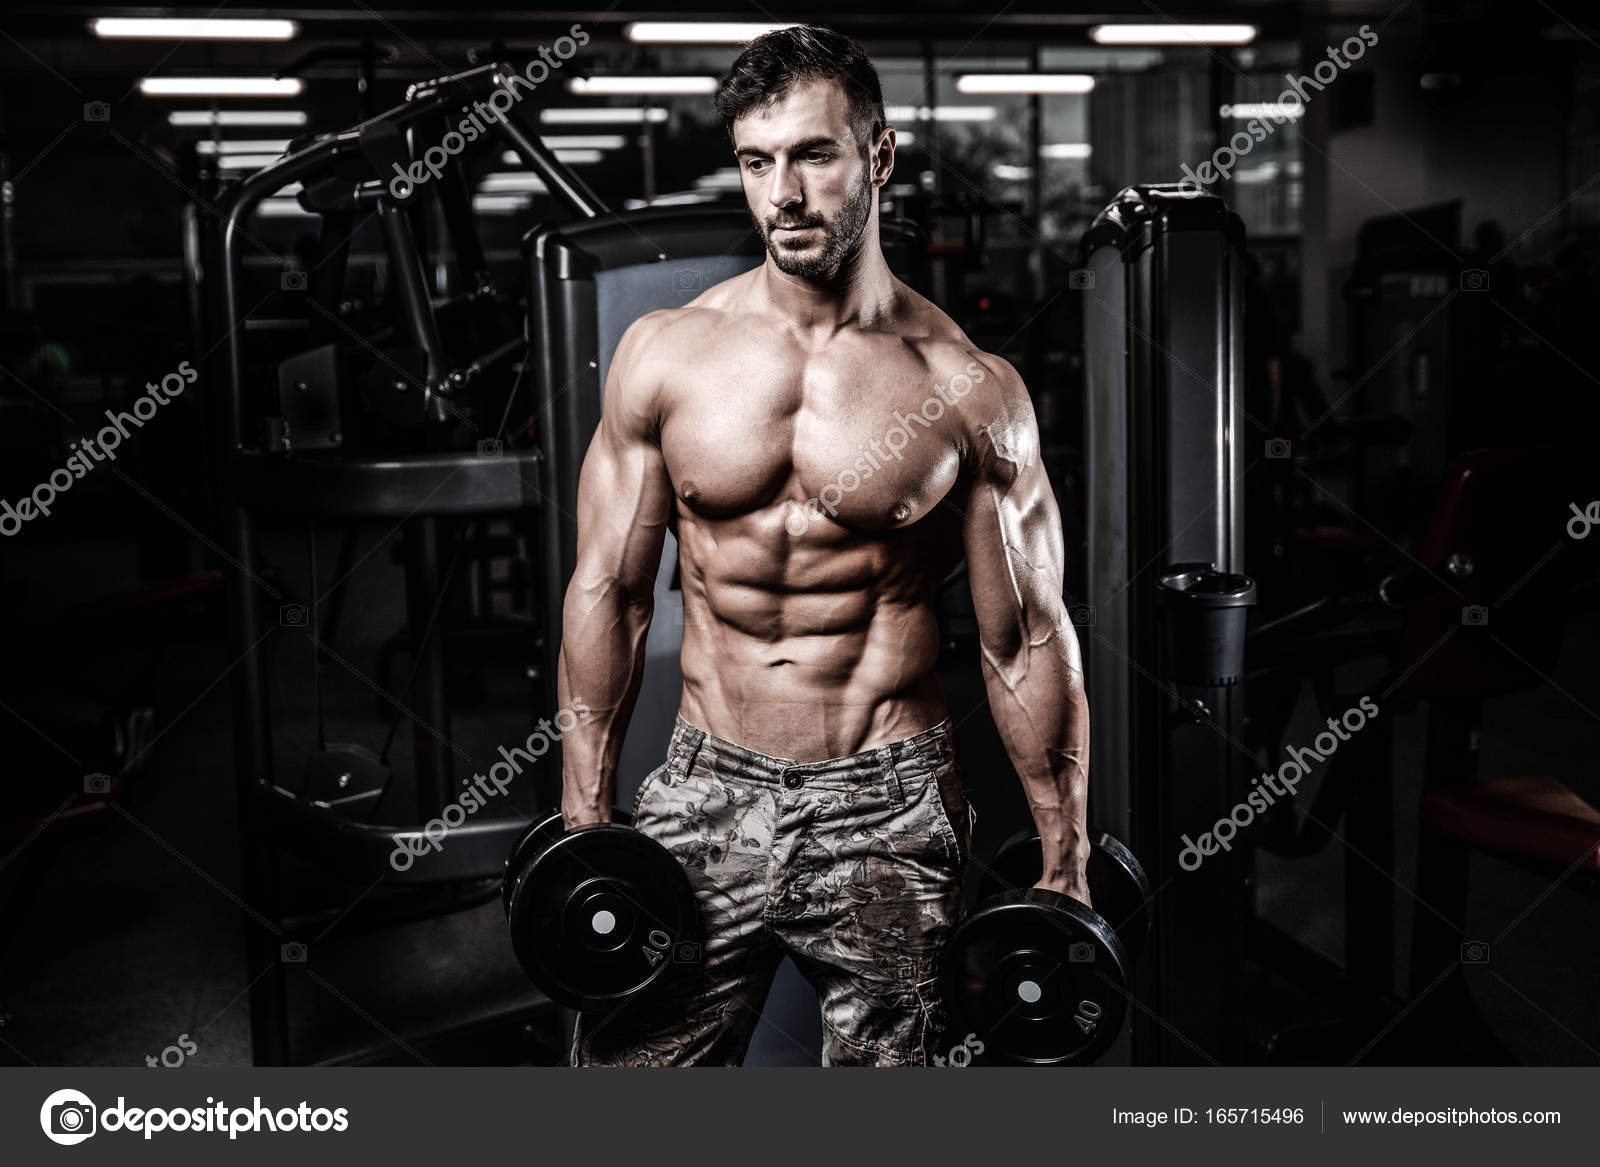 Male Fitness Model Workouts